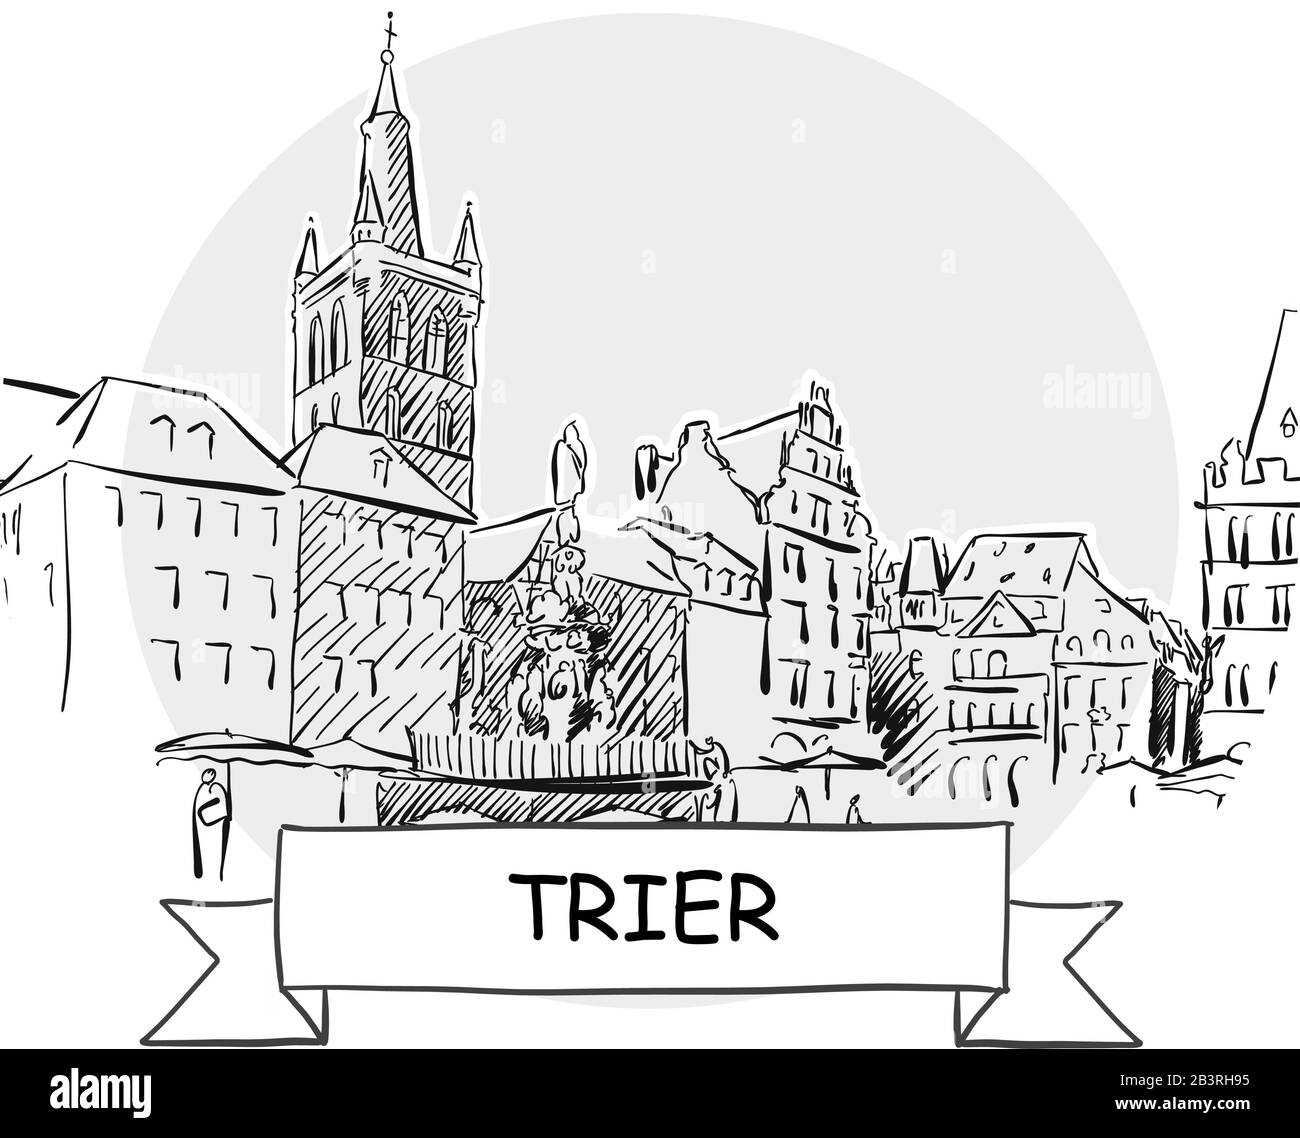 Trier Hand-Drawn Urban Vector Sign. Black Line Art Illustration with Ribbon and Title. Stock Vector